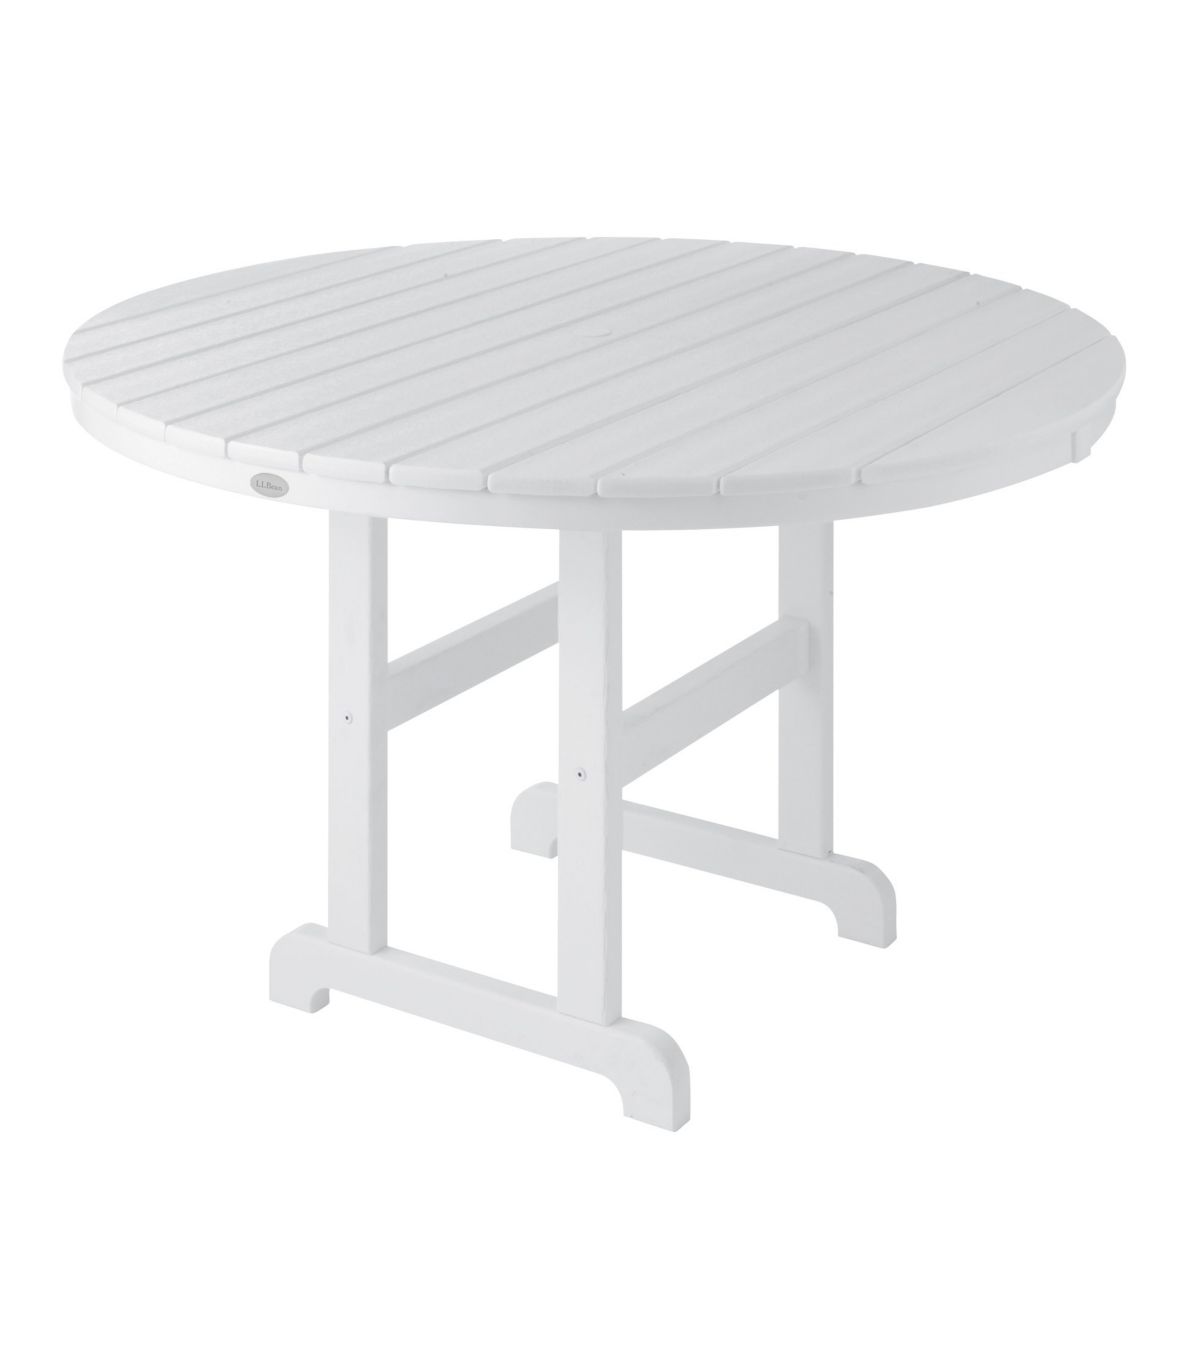 All-Weather Dining Table, Round 48"